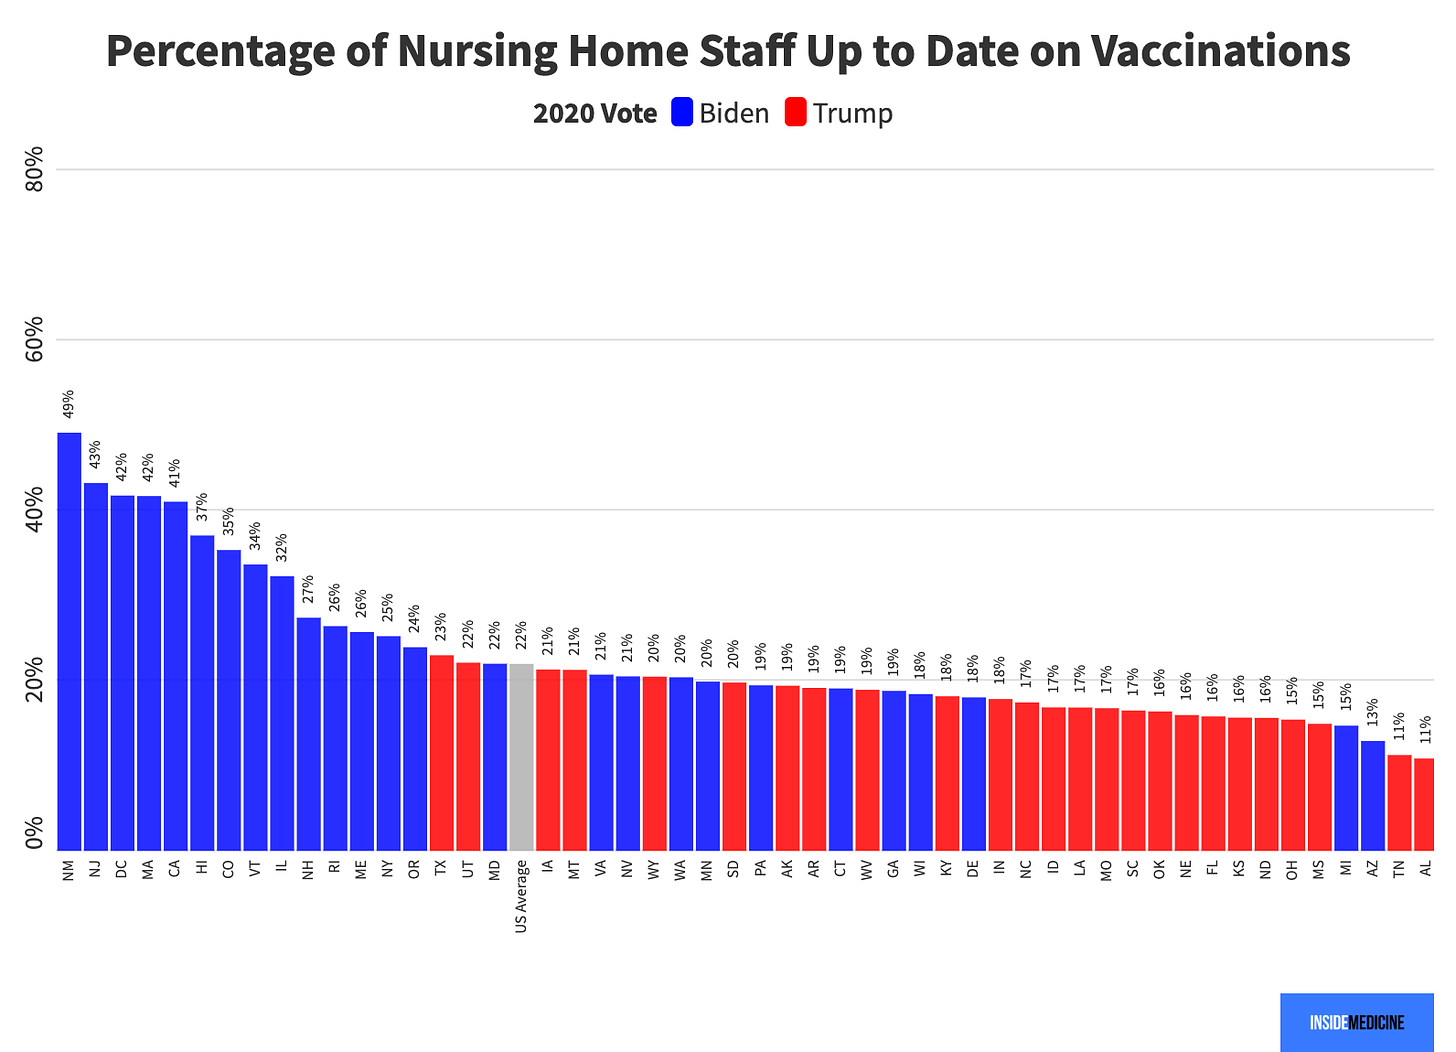 Percentage of nursing home staff up to date on vaccines by Biden and Trump vote